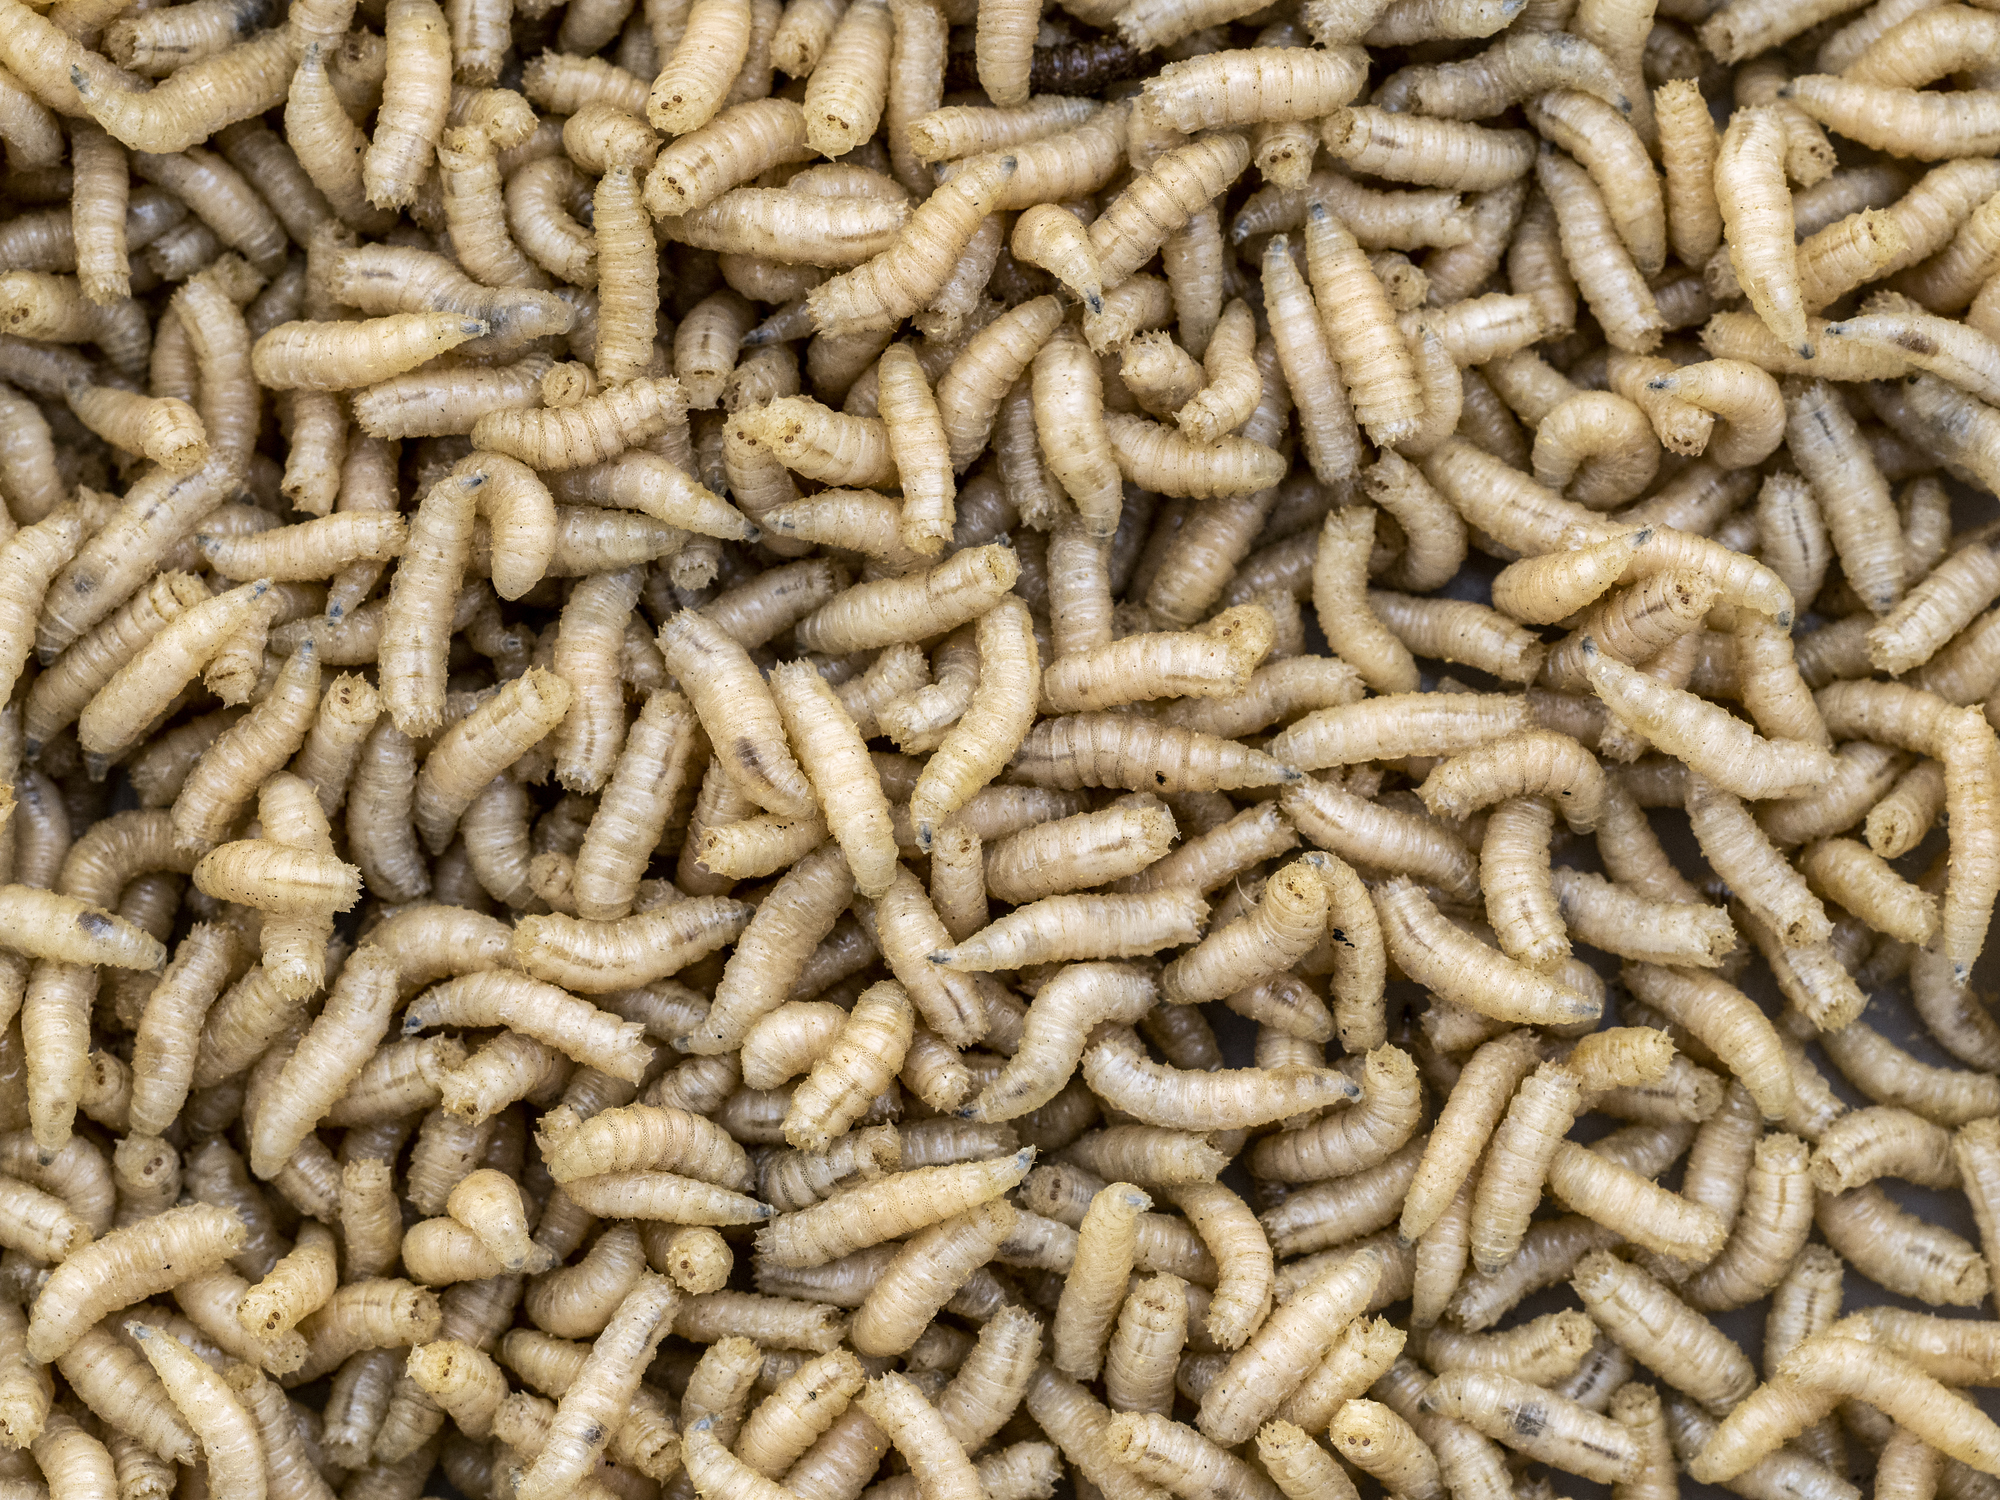 A large close-up of many maggots wriggling together